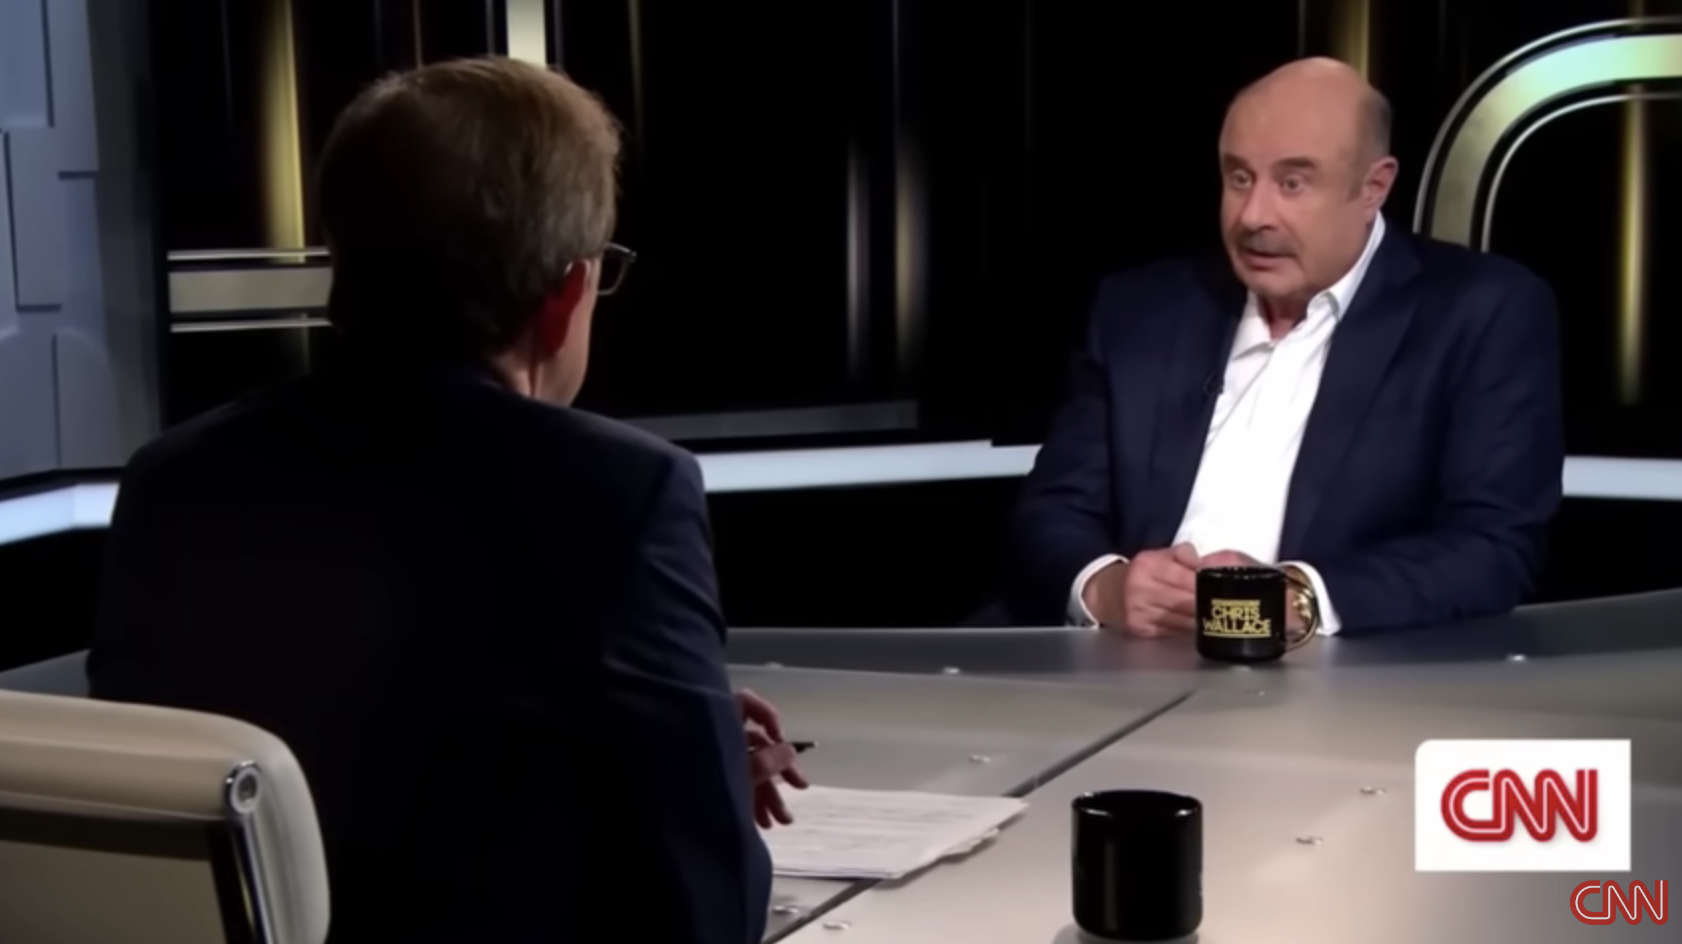 Dr. Phil being interviewed